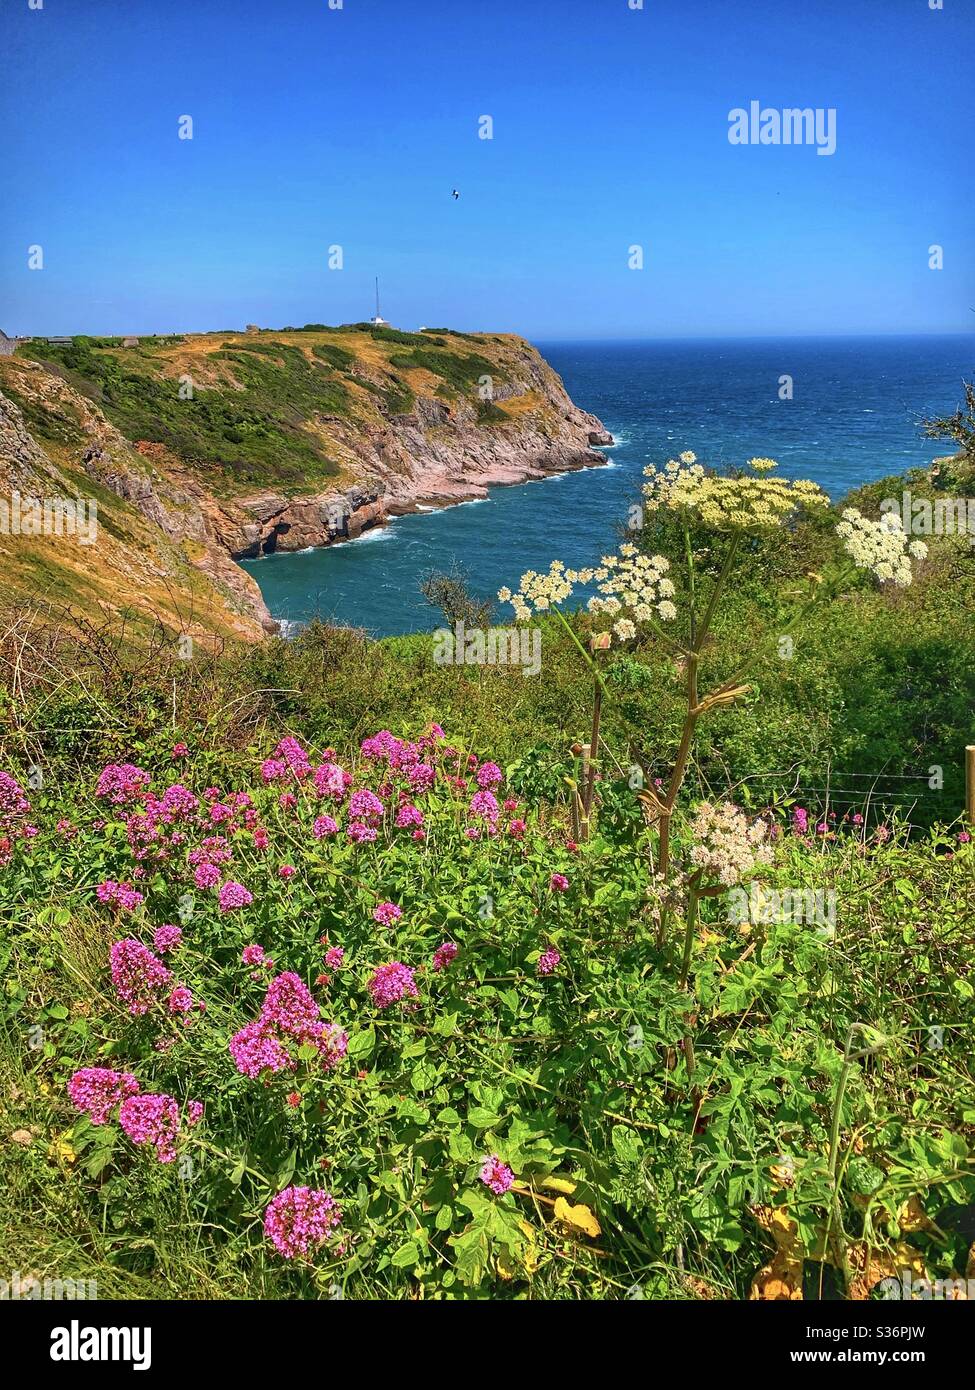 Portrait orientation of a beautiful sea view of Berry Head in Brixham, Davon. Blue sea, blue sky framed by green foliage and colourful flowers. Stock Photo